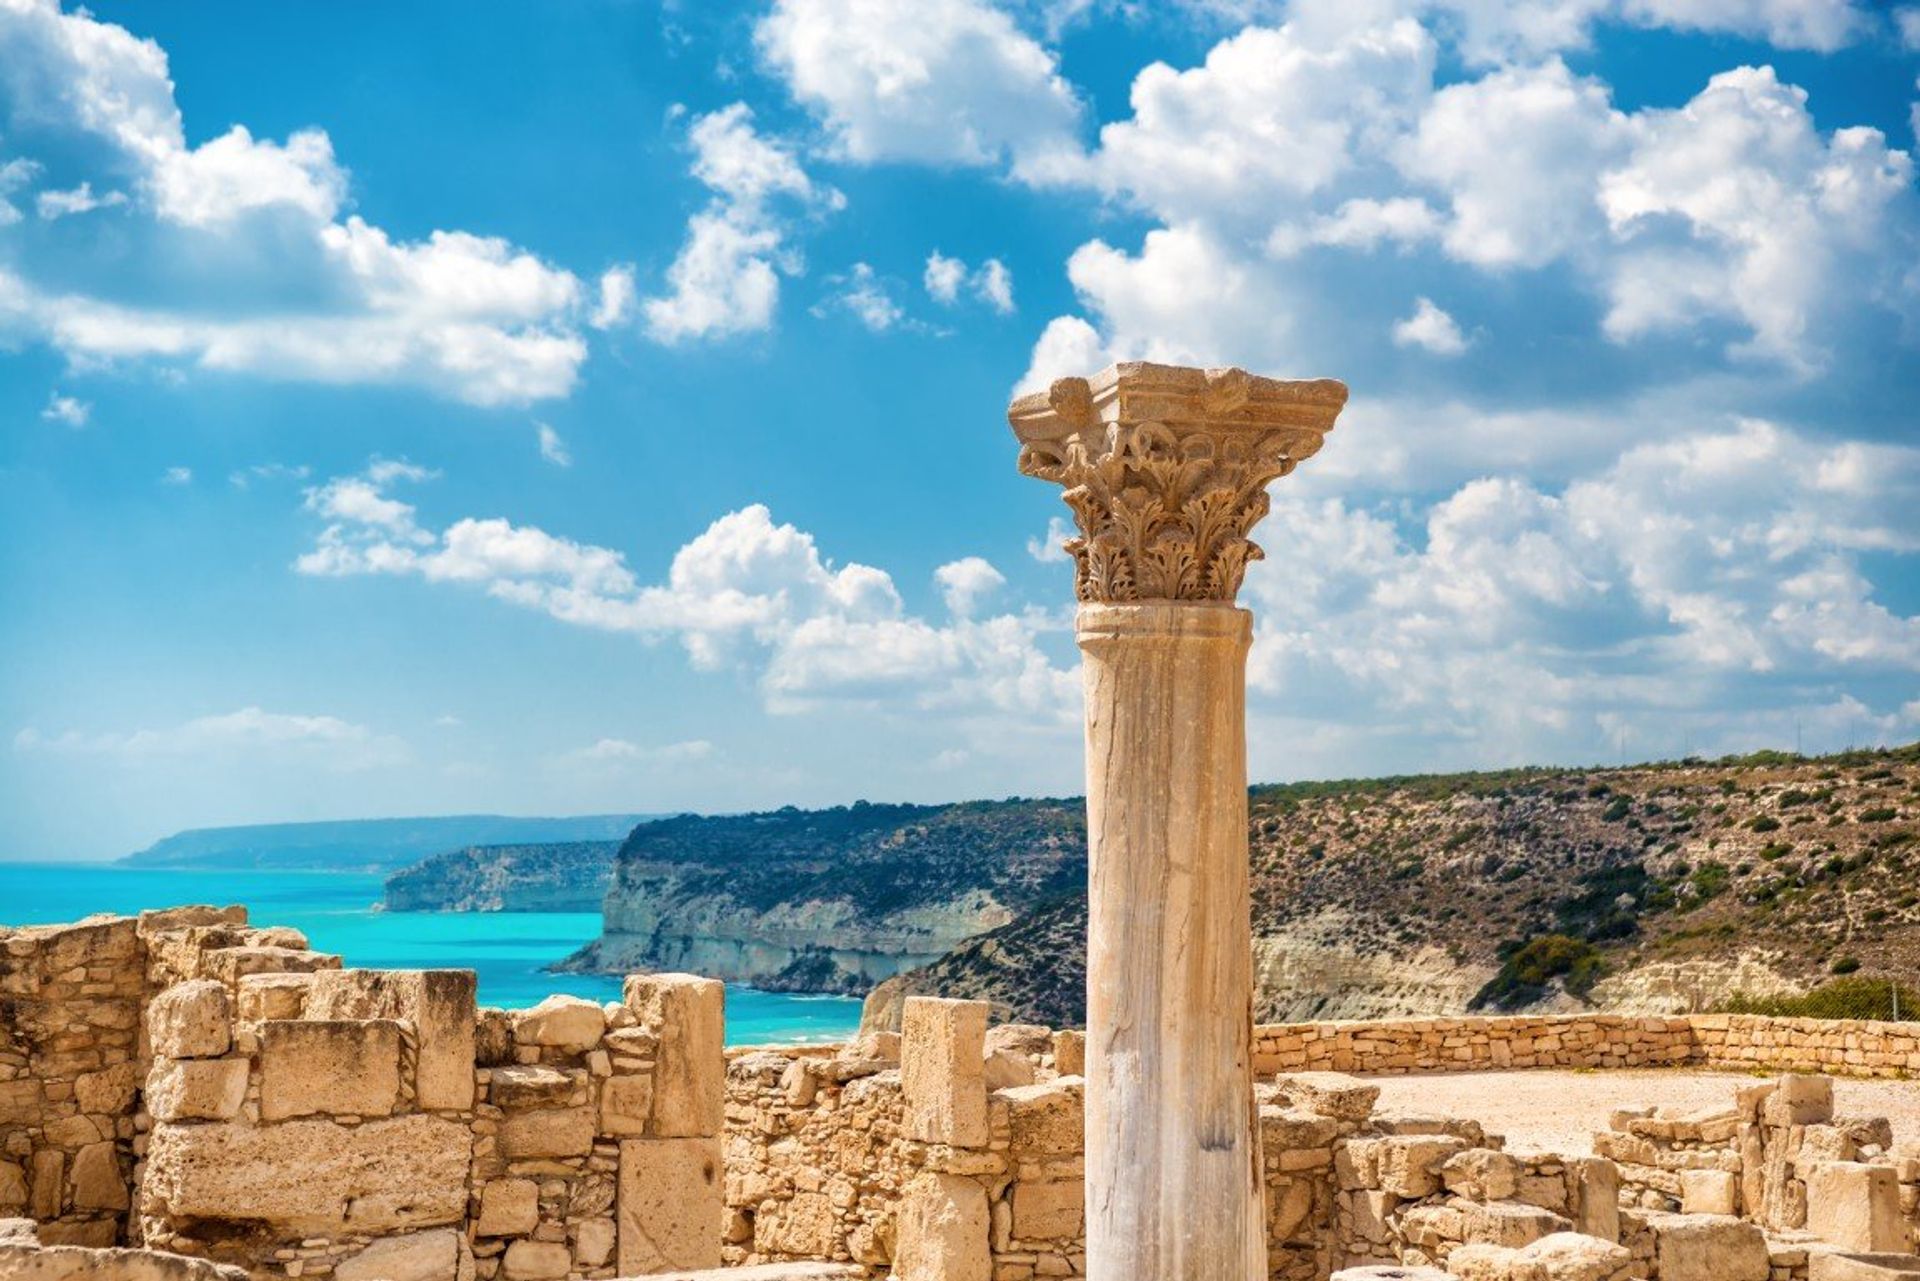 Visit the ruins of ancient Kourion in Limassol, from a time of myths and legends